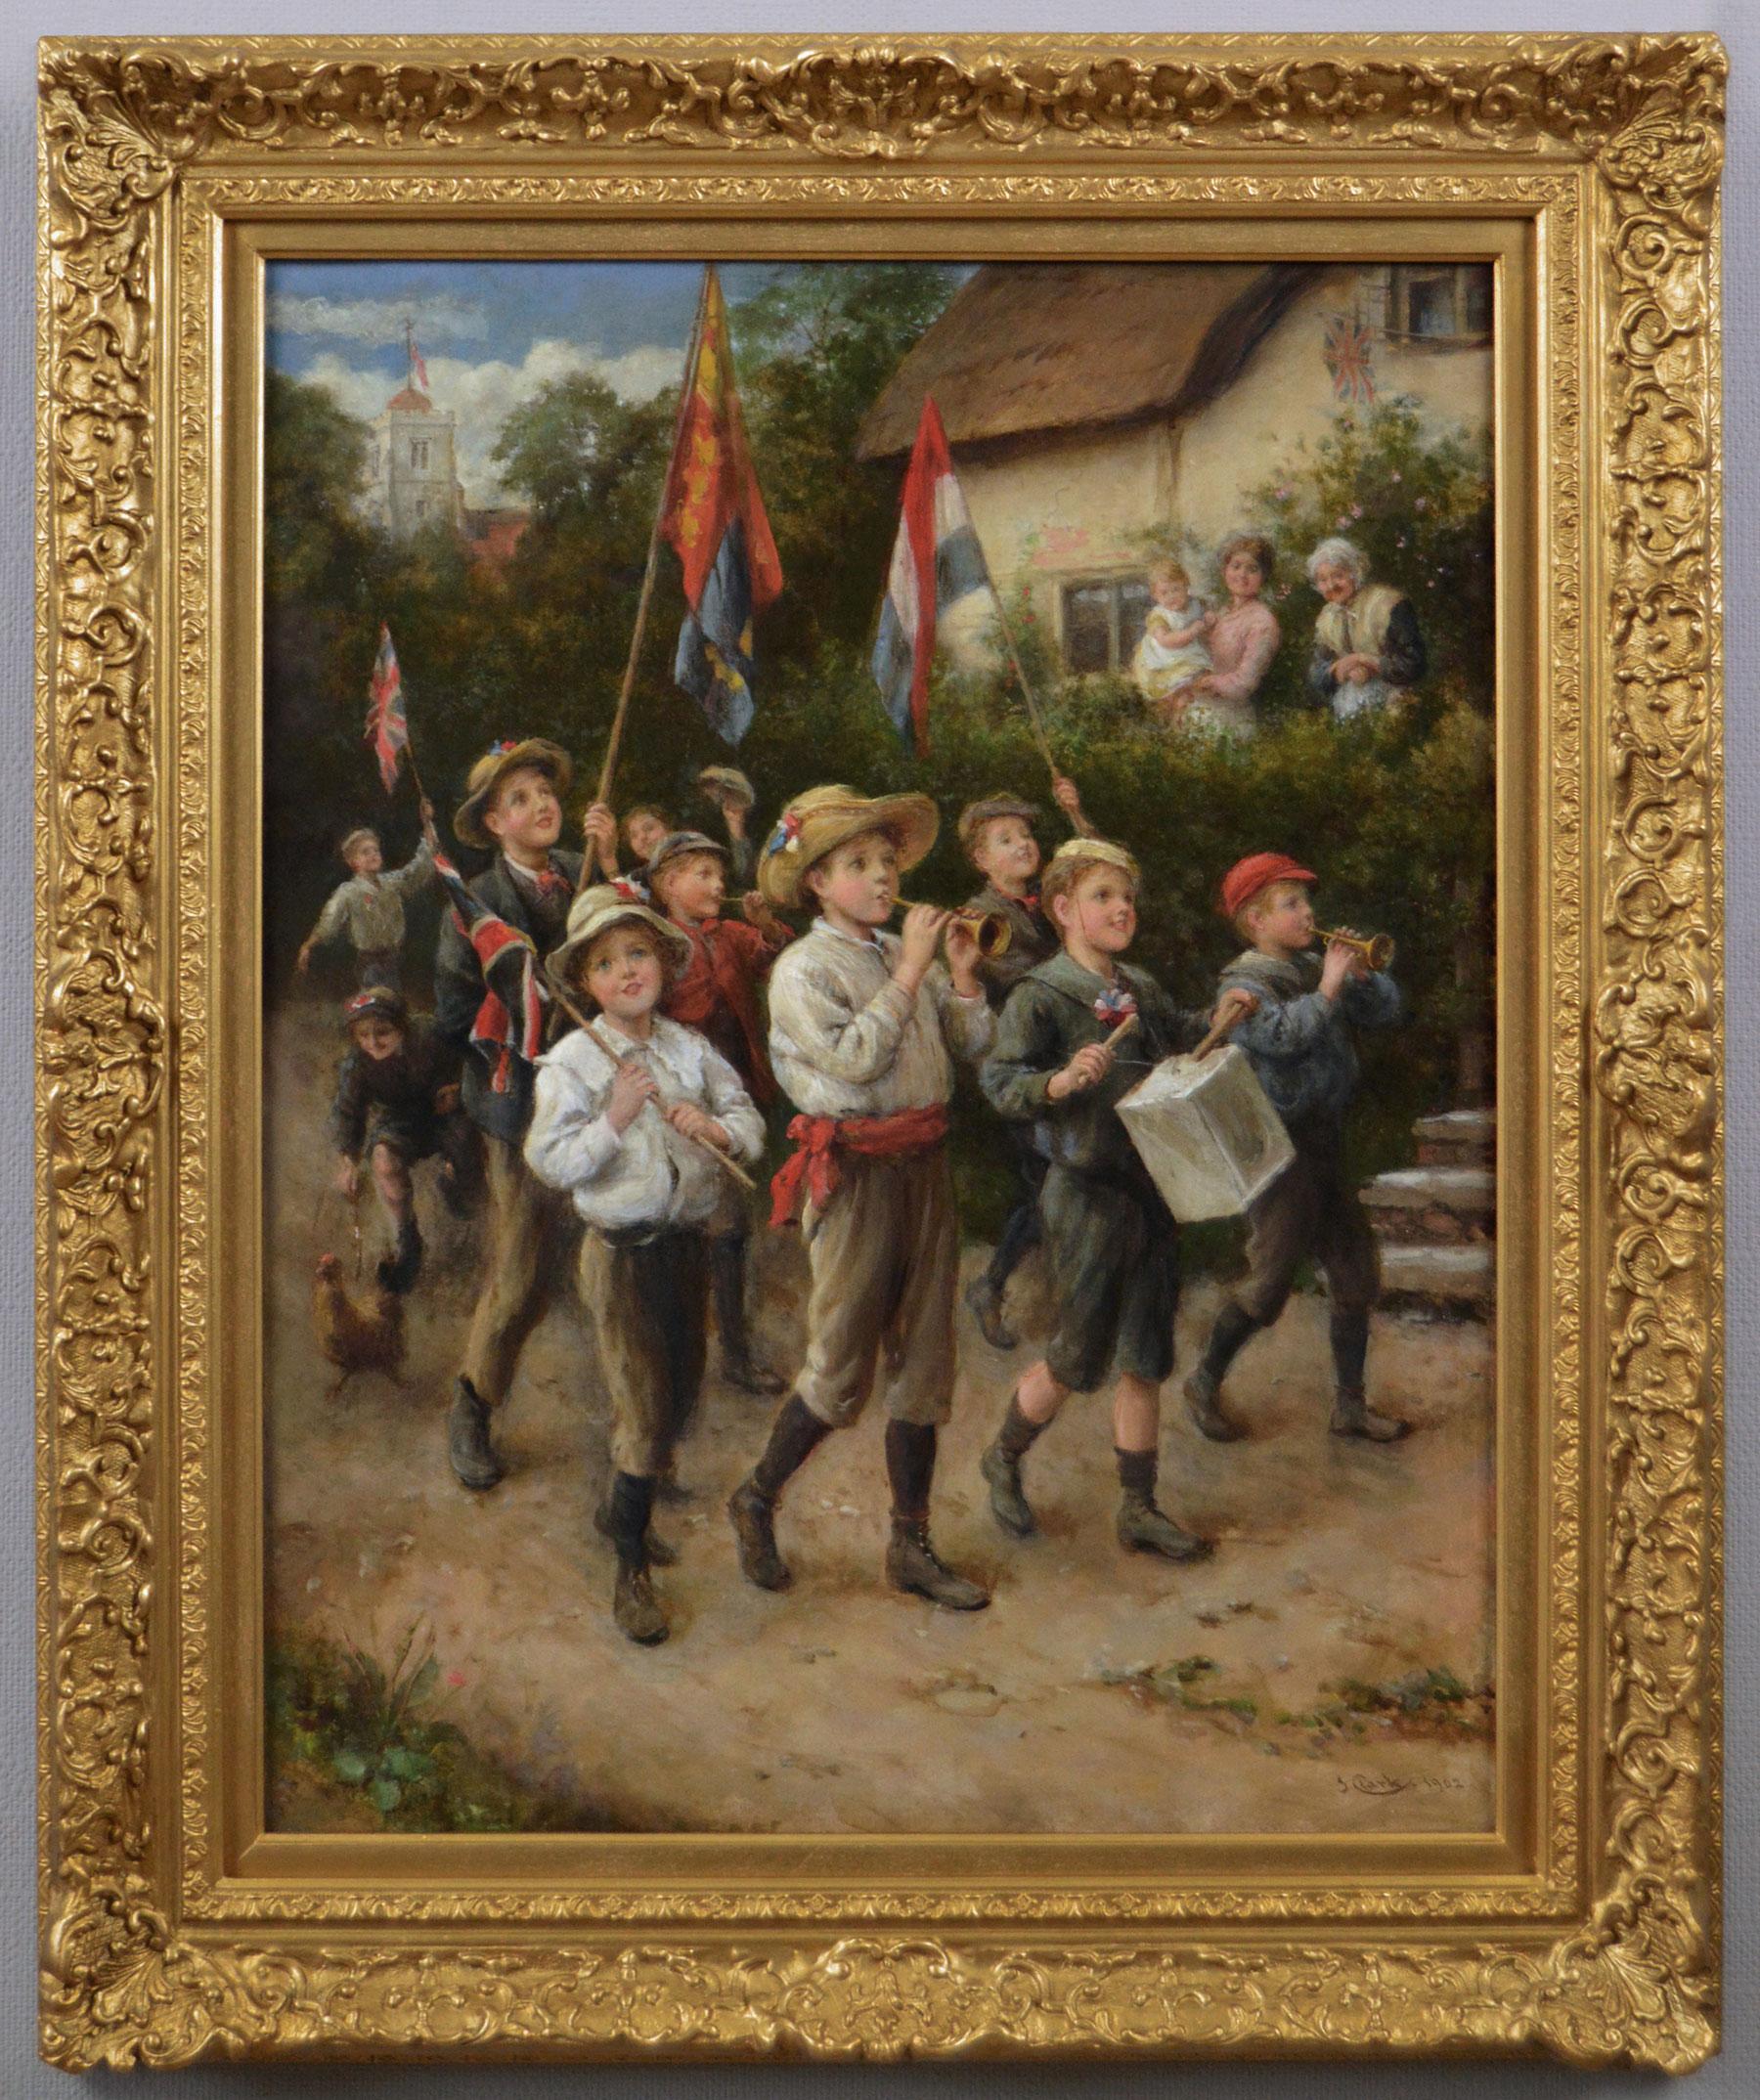 Joseph Clark Figurative Painting - Genre oil painting of a children’s coronation marching band